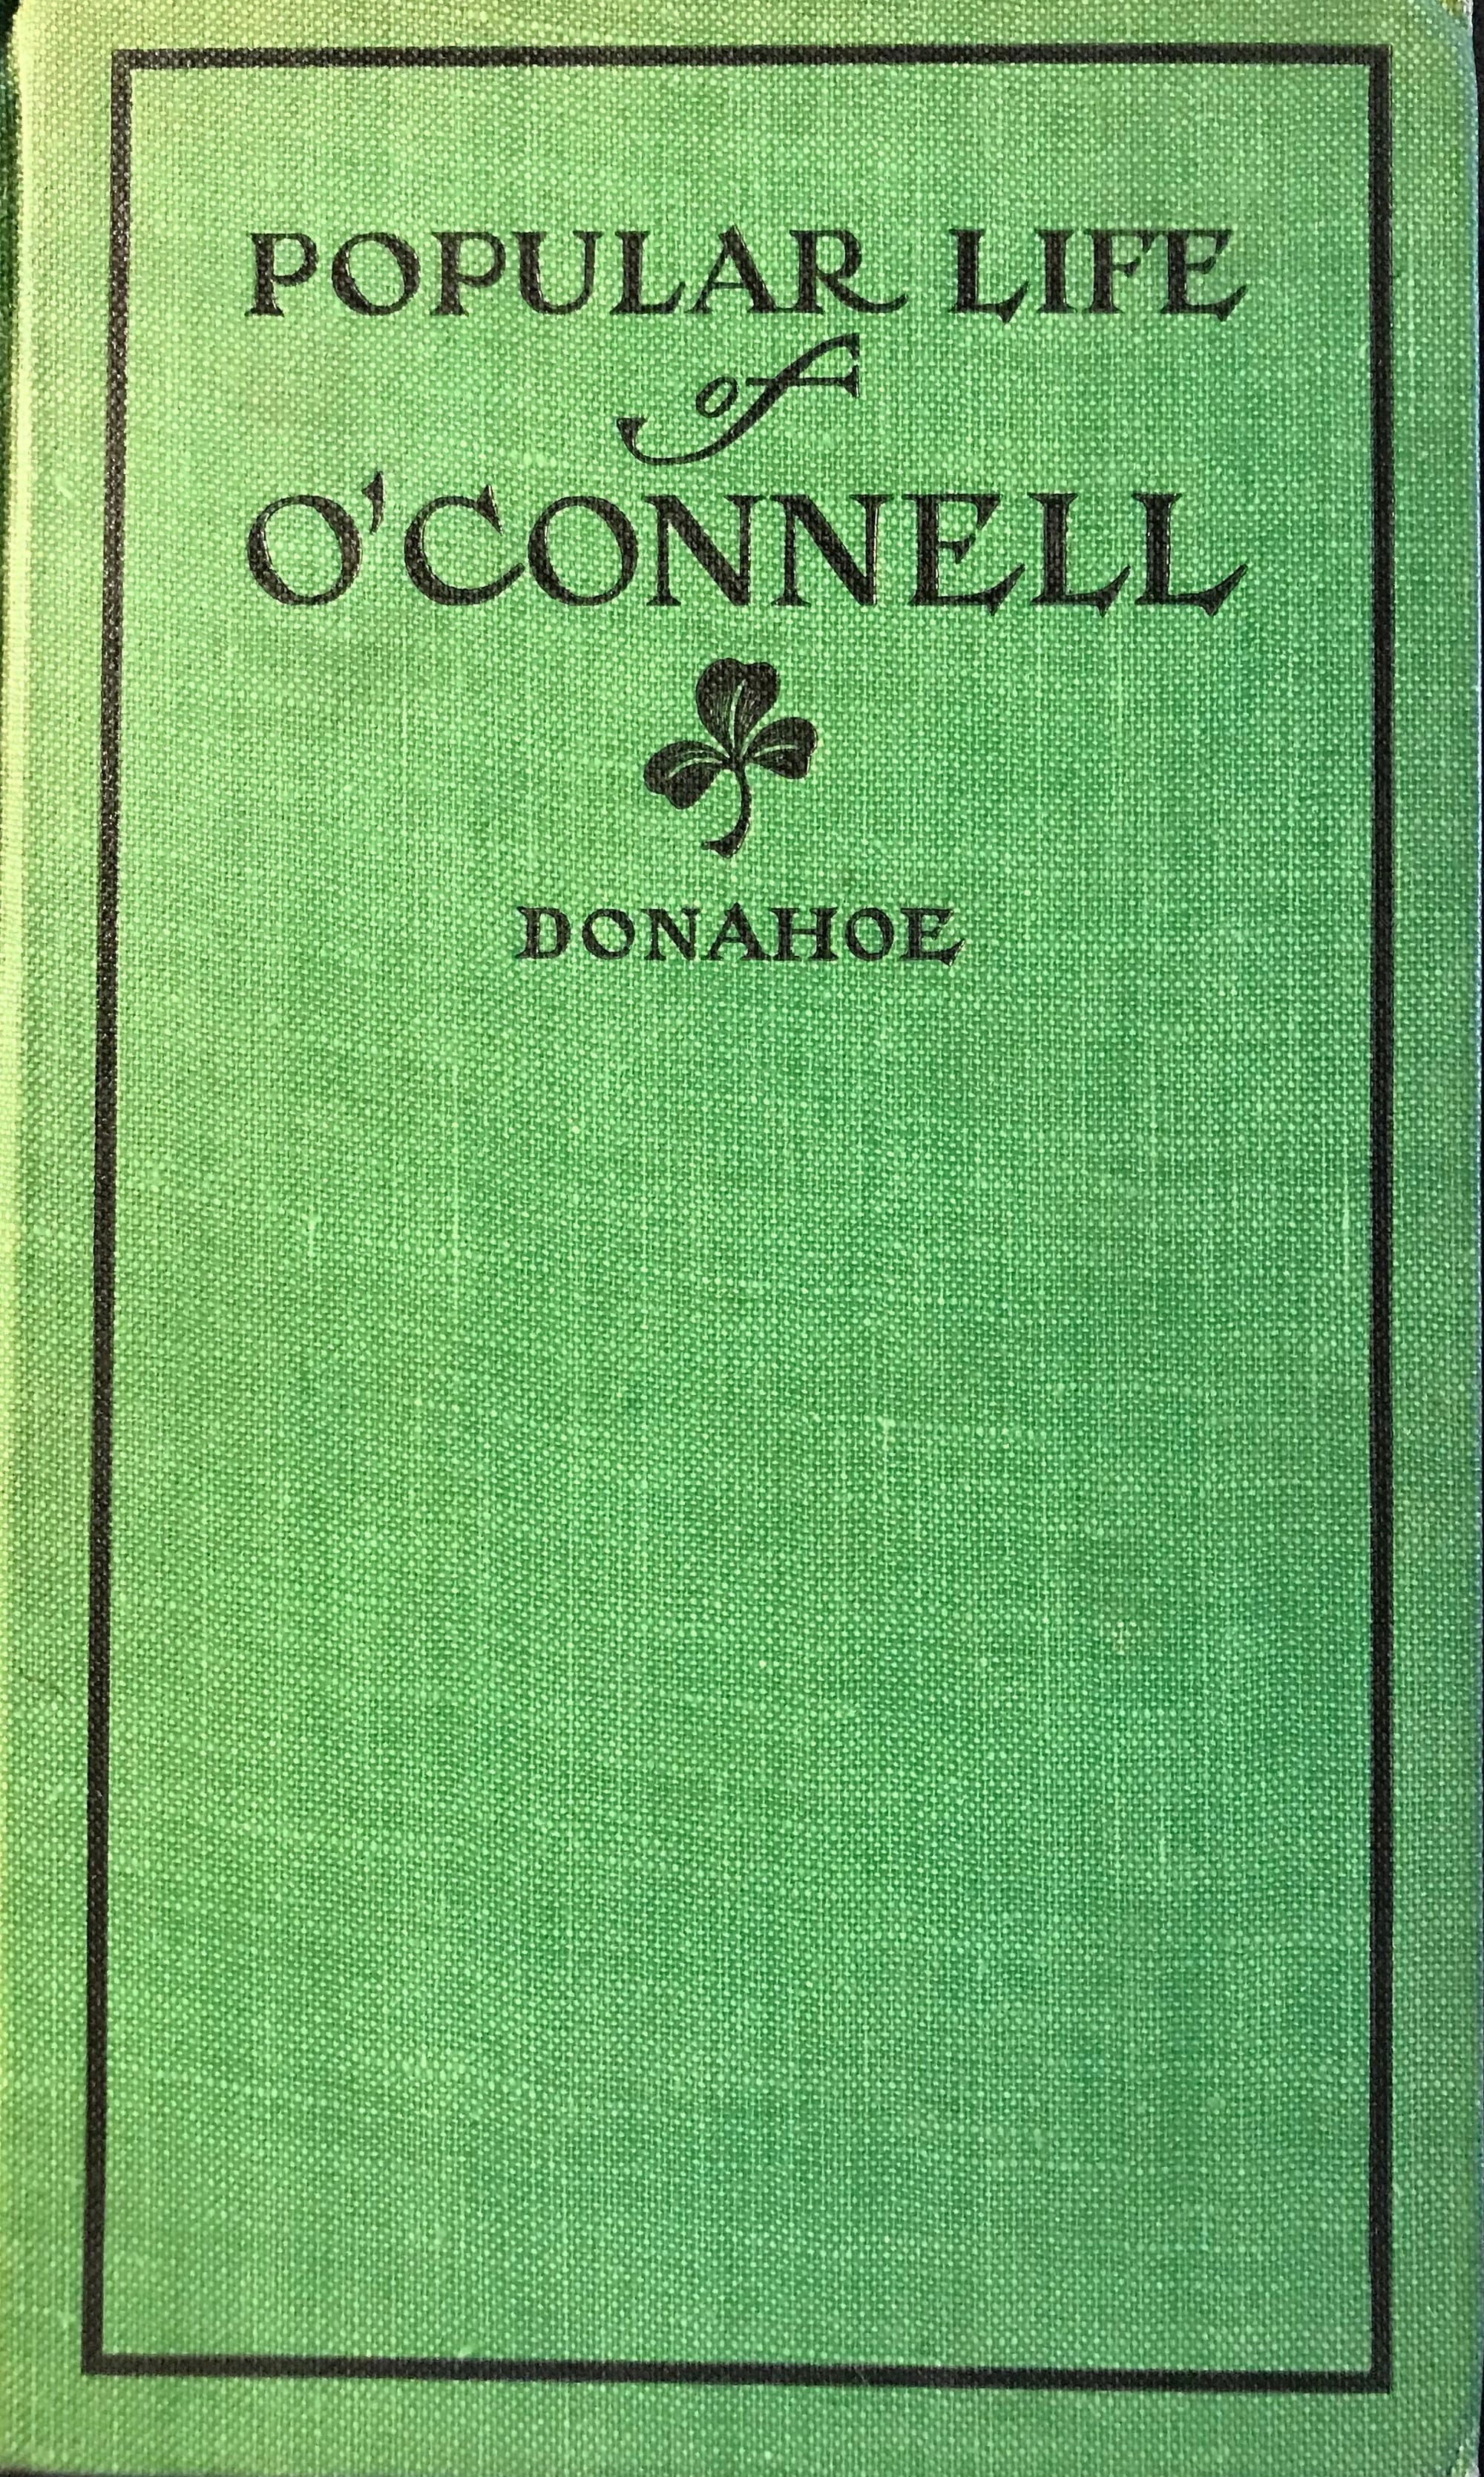 Popular Life of Daniel O’Connell